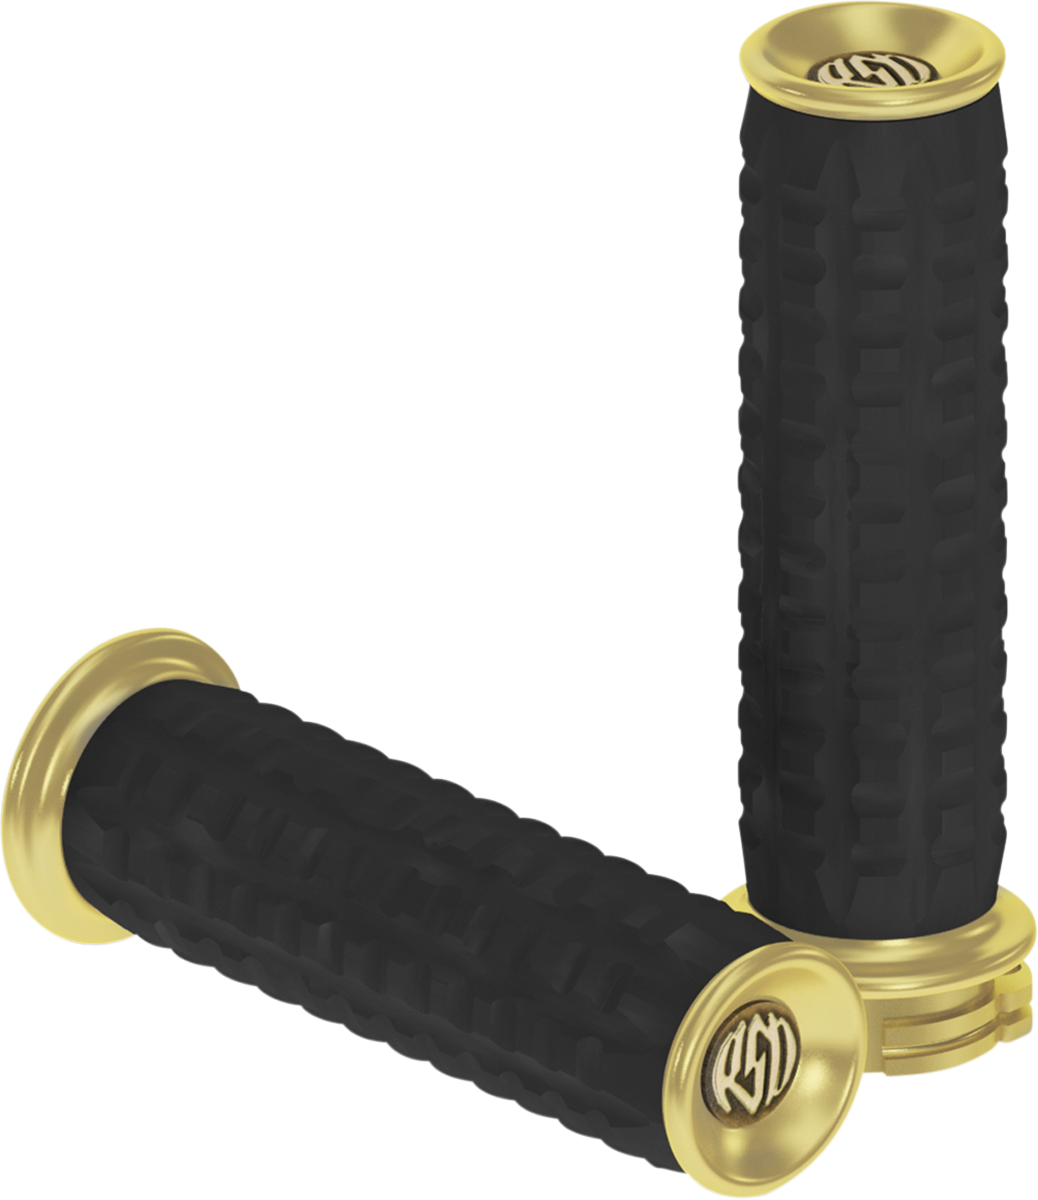 0630-1334 - RSD Grips - Traction - TBW - Brass 0063-2070